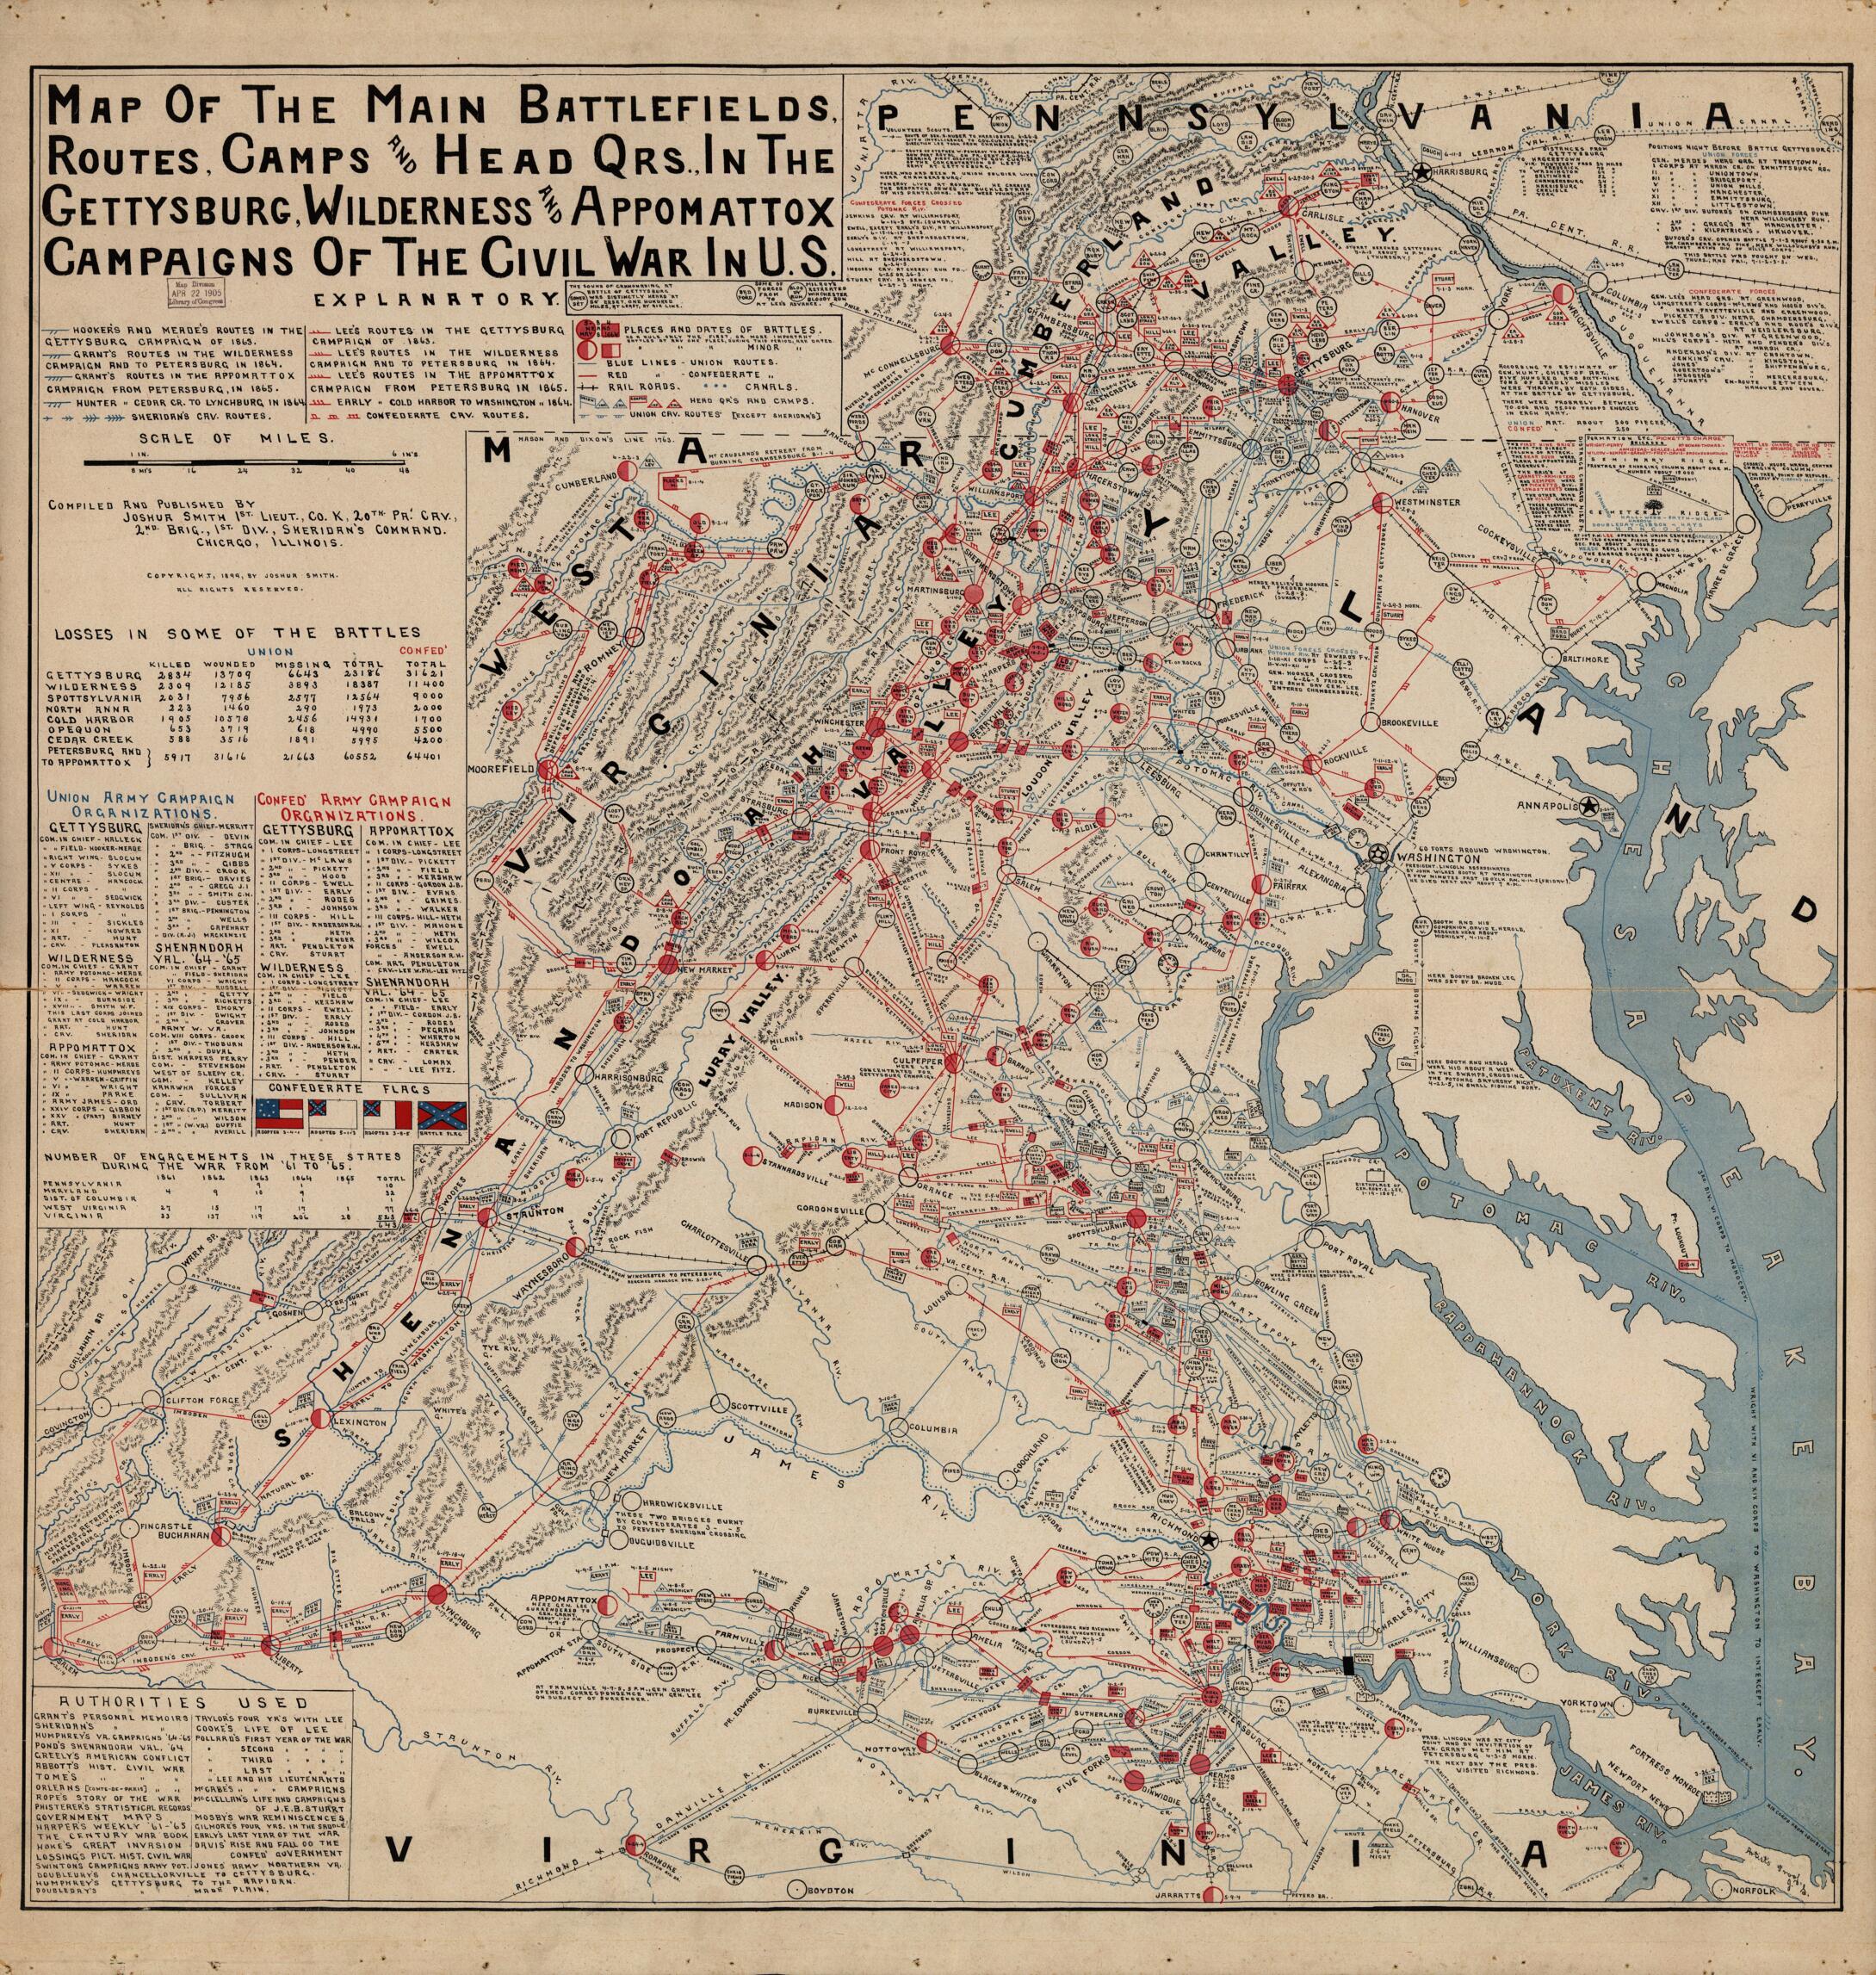 This old map of Map of the Main Battlefields, Routes, Camps and Head Qrs., In the Gettysburg, Wilderness and Appomattox Campaigns of the Civil War In U.S from 1900 was created by Joshua Smith in 1900